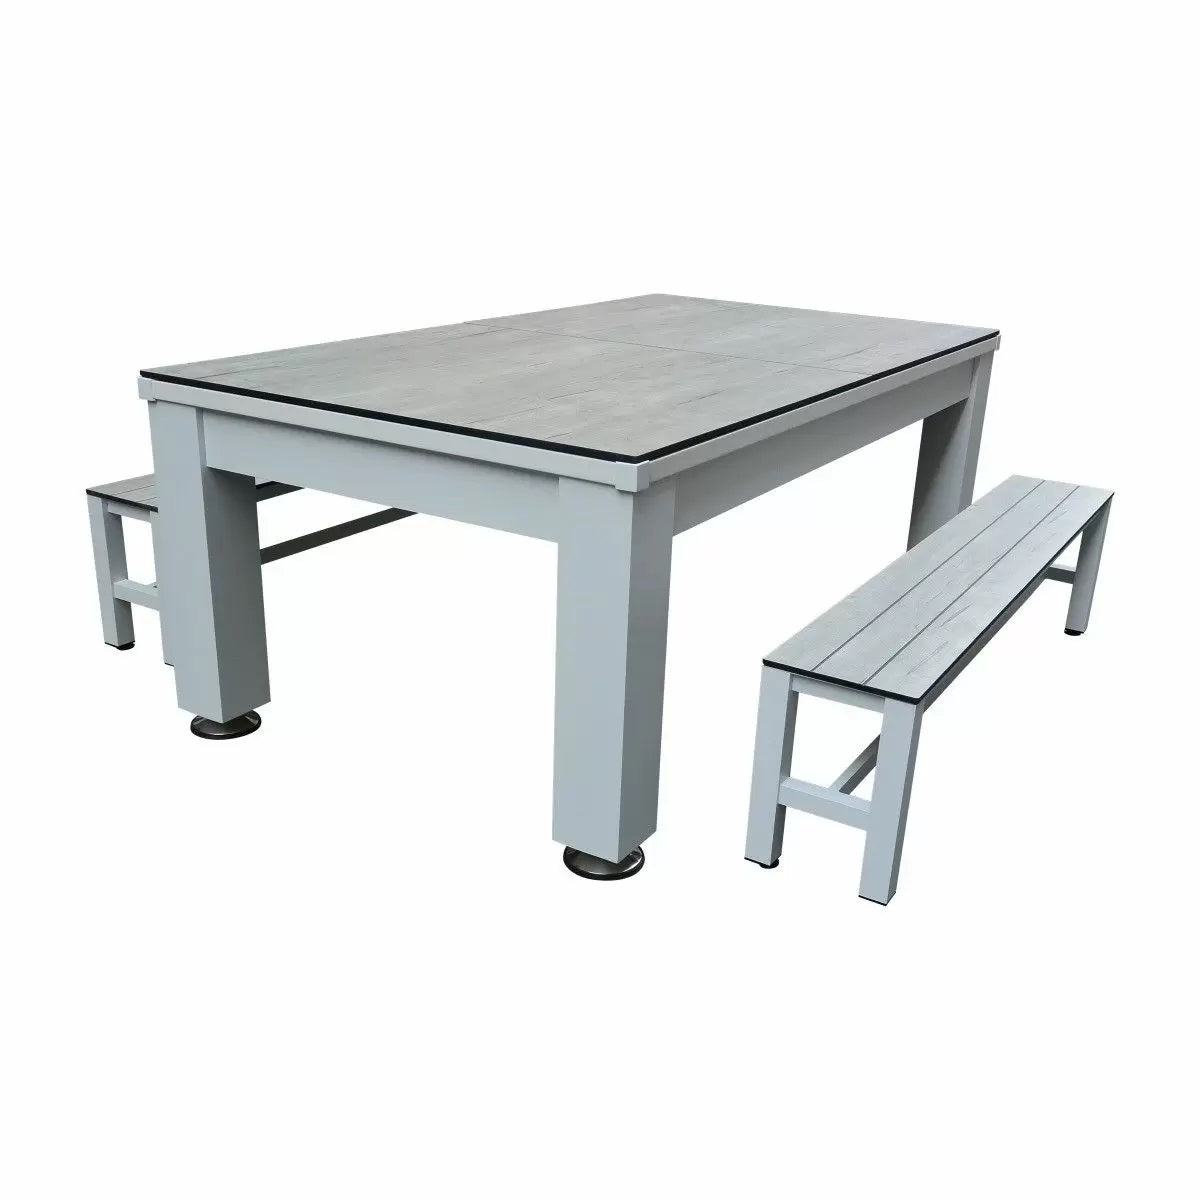 Imperial Esterno Outdoor Table Dining Top and Tennis Table dinning